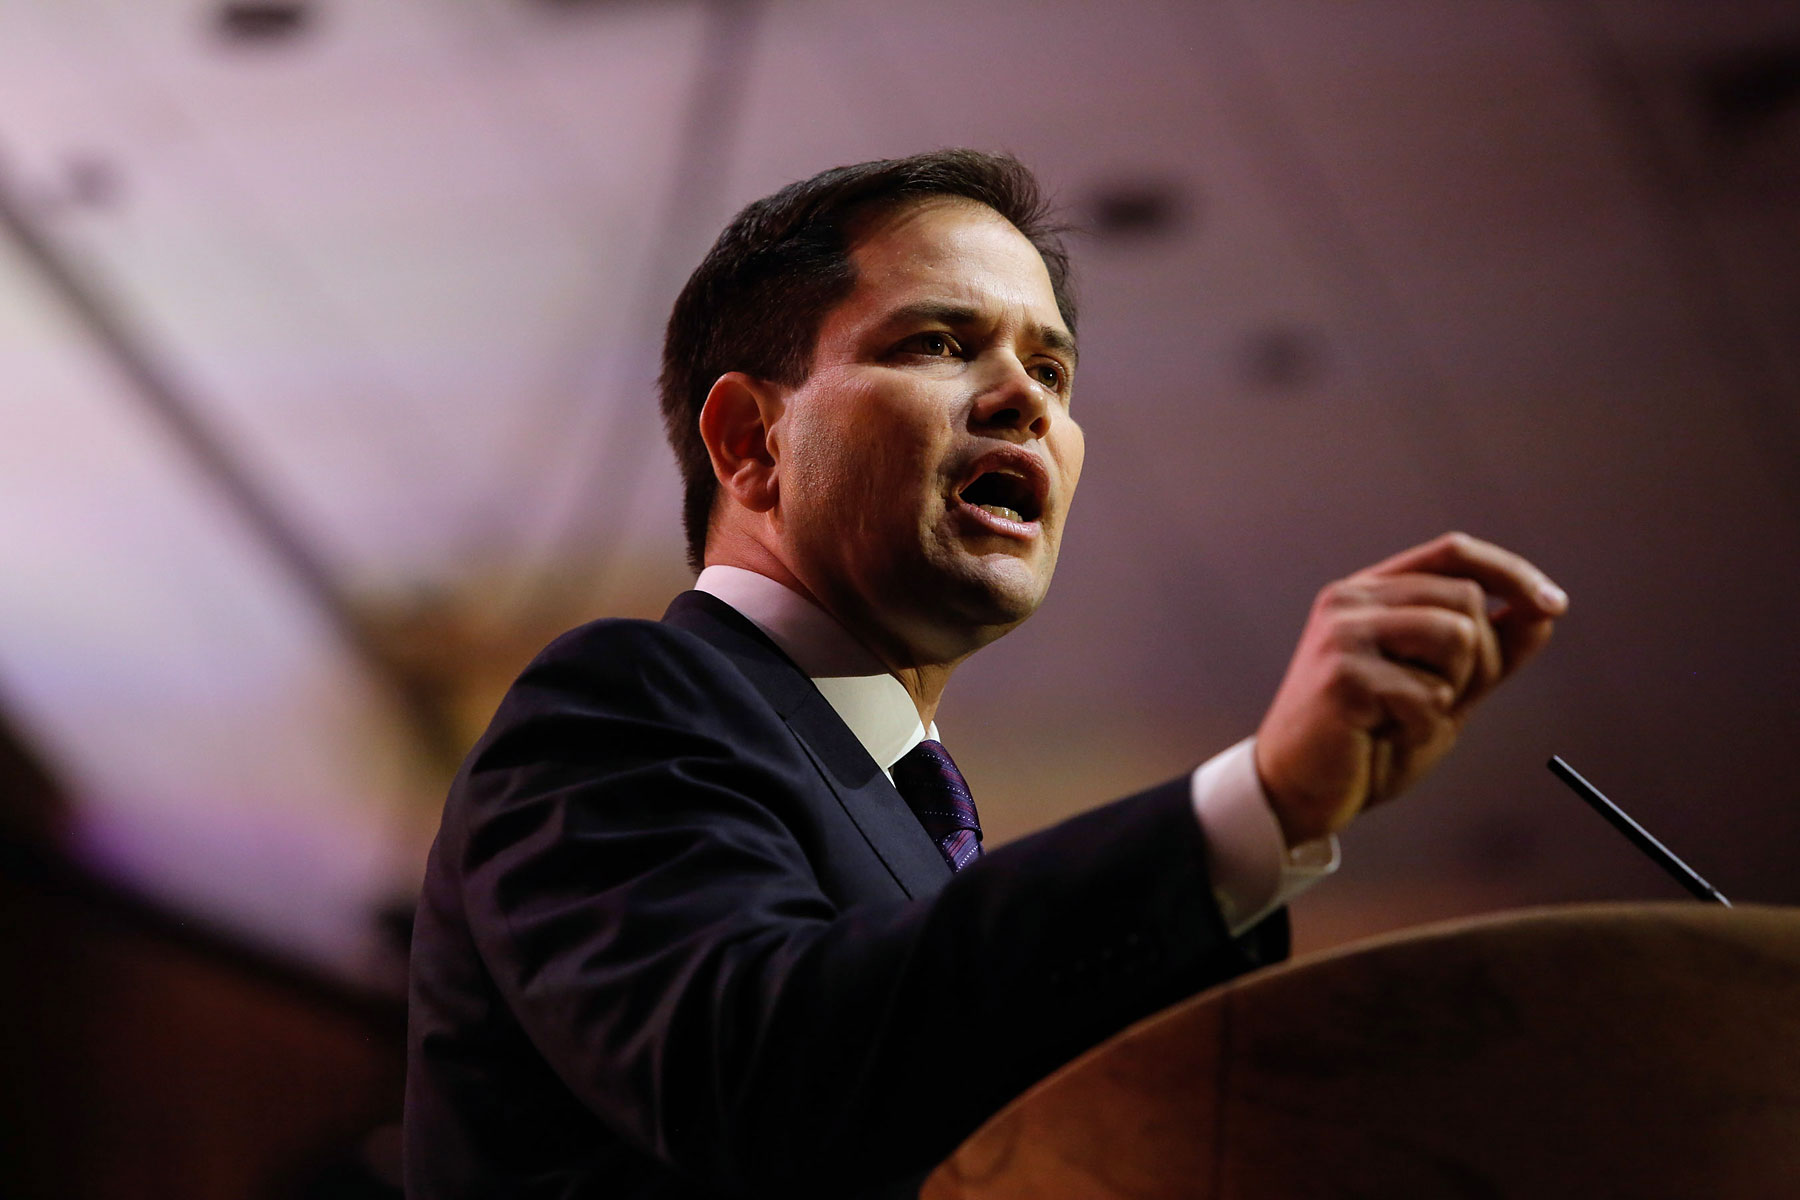 Sen. Marco Rubio speaks during the Conservative Political Action Conference at the Gaylord National Resort &amp; Convention Center in National Harbor, Md., March 6, 2014.